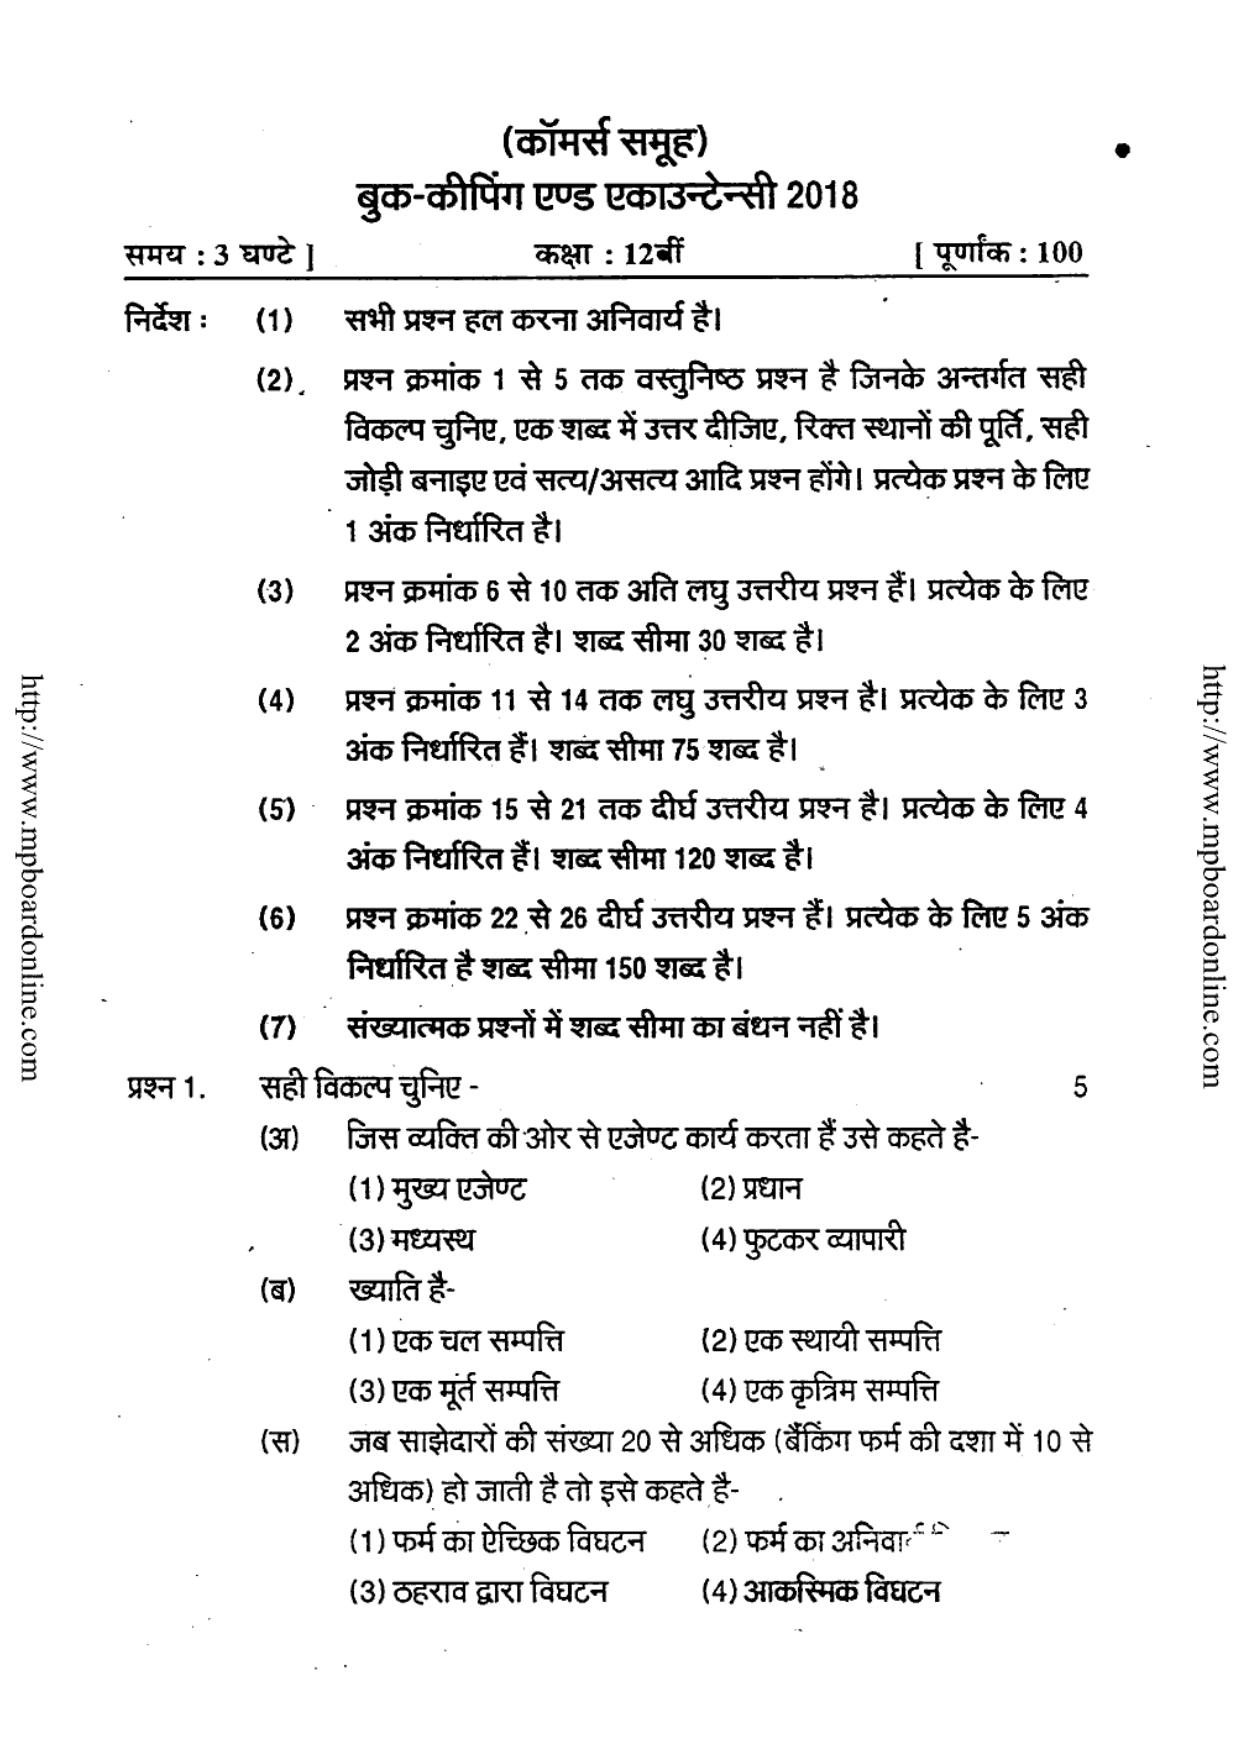 MP Board Class 12 Book Keeping And Accountancy 2018 Question Paper - Page 7